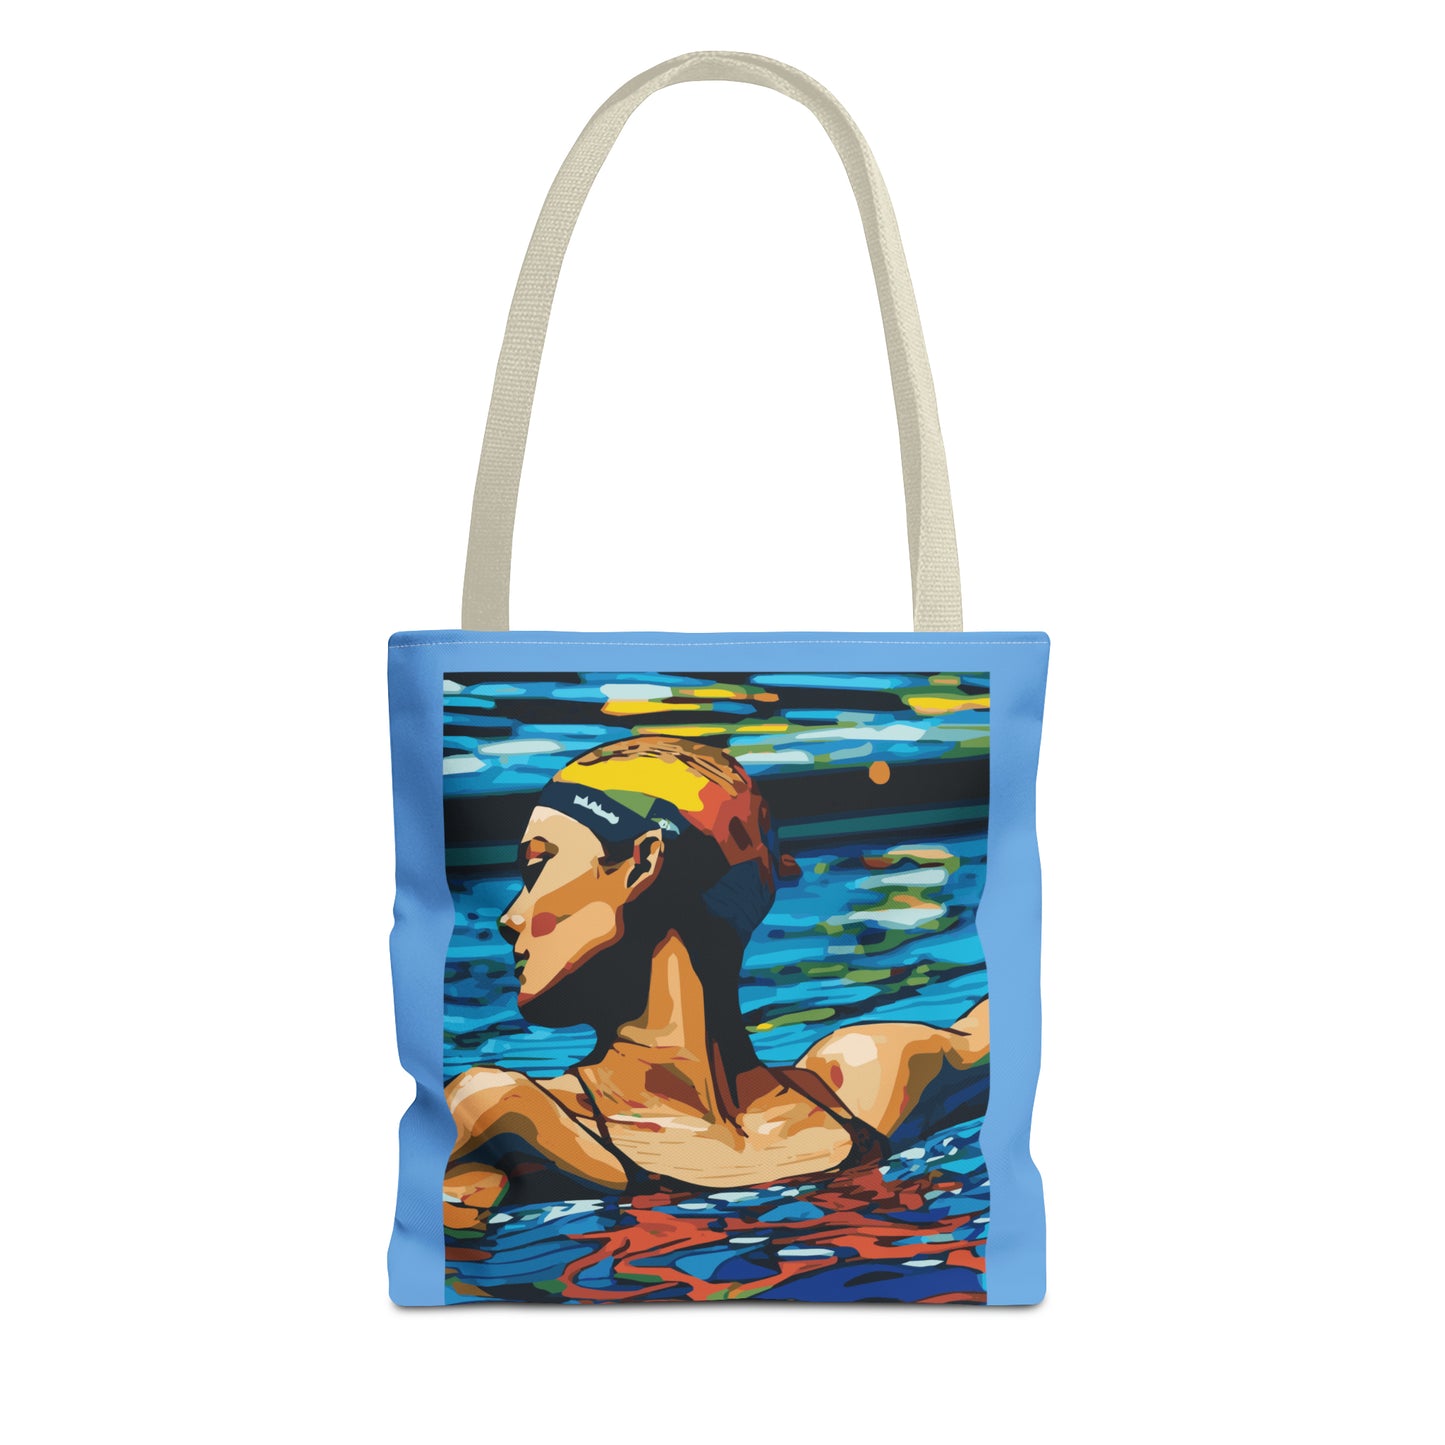 Swim with her Tote Bag